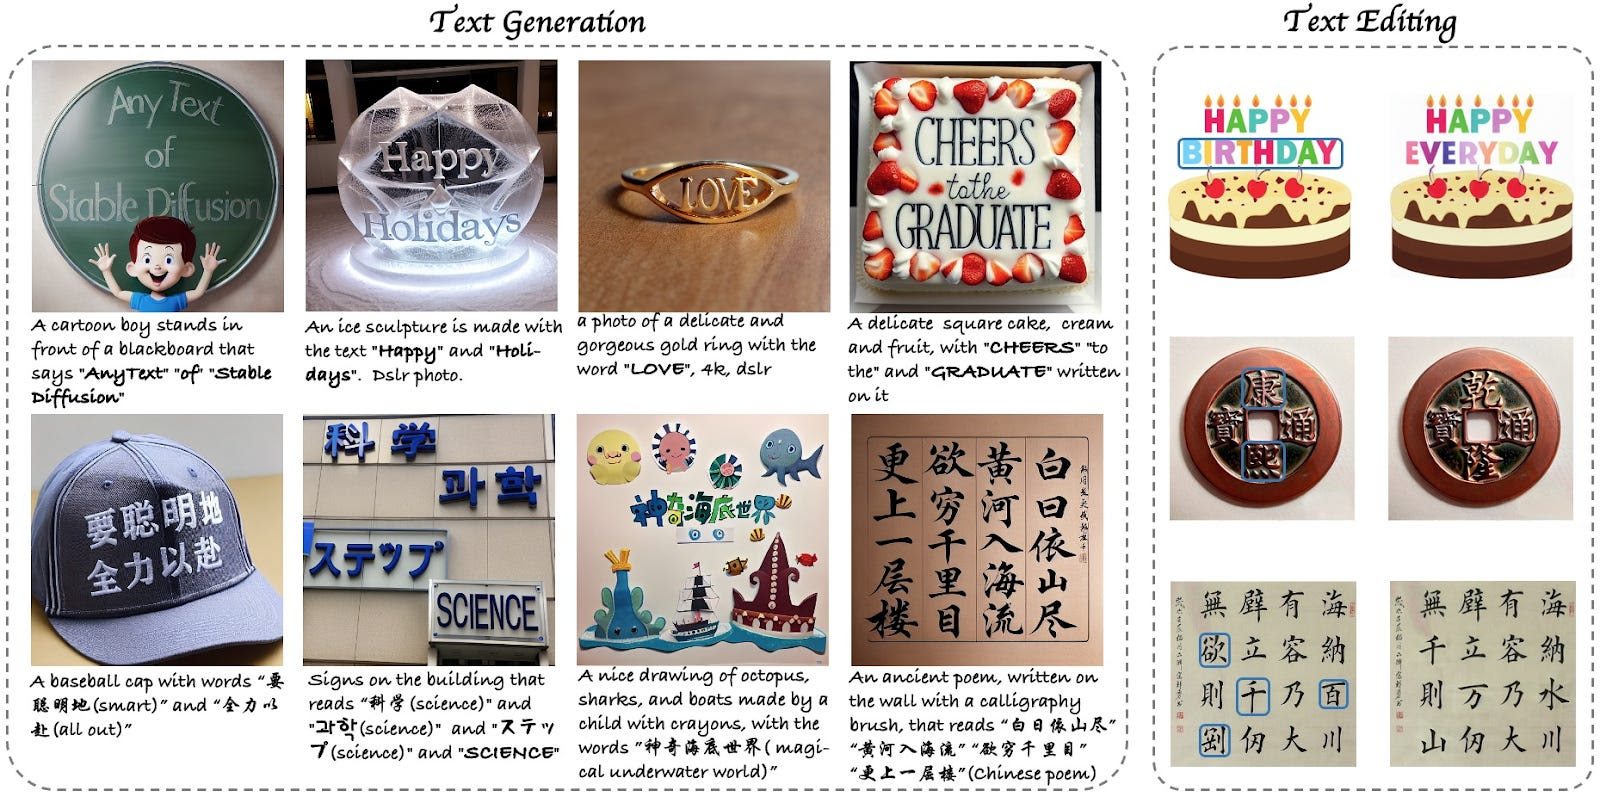 Alibaba releases AnyText for multilingual visual text generation and editing